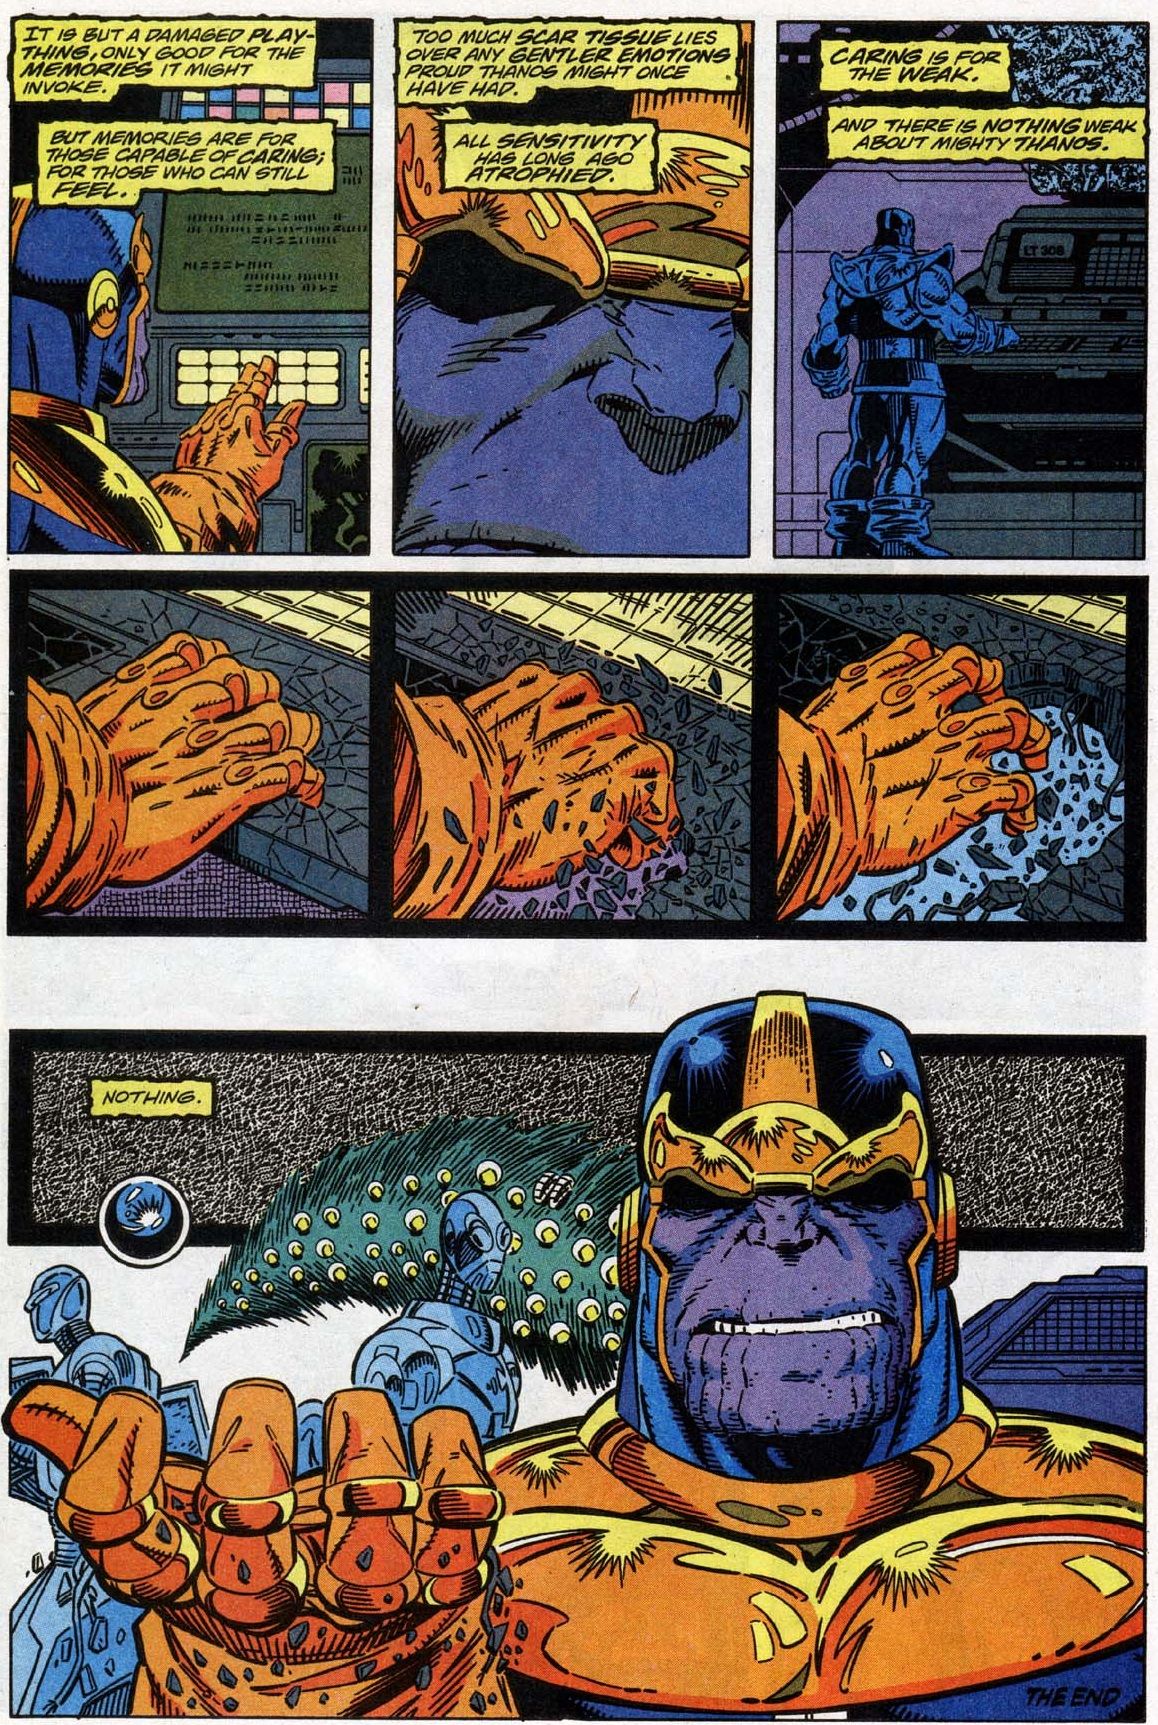 Thanos pretends that he doesn't care about Gamora, but we know he does